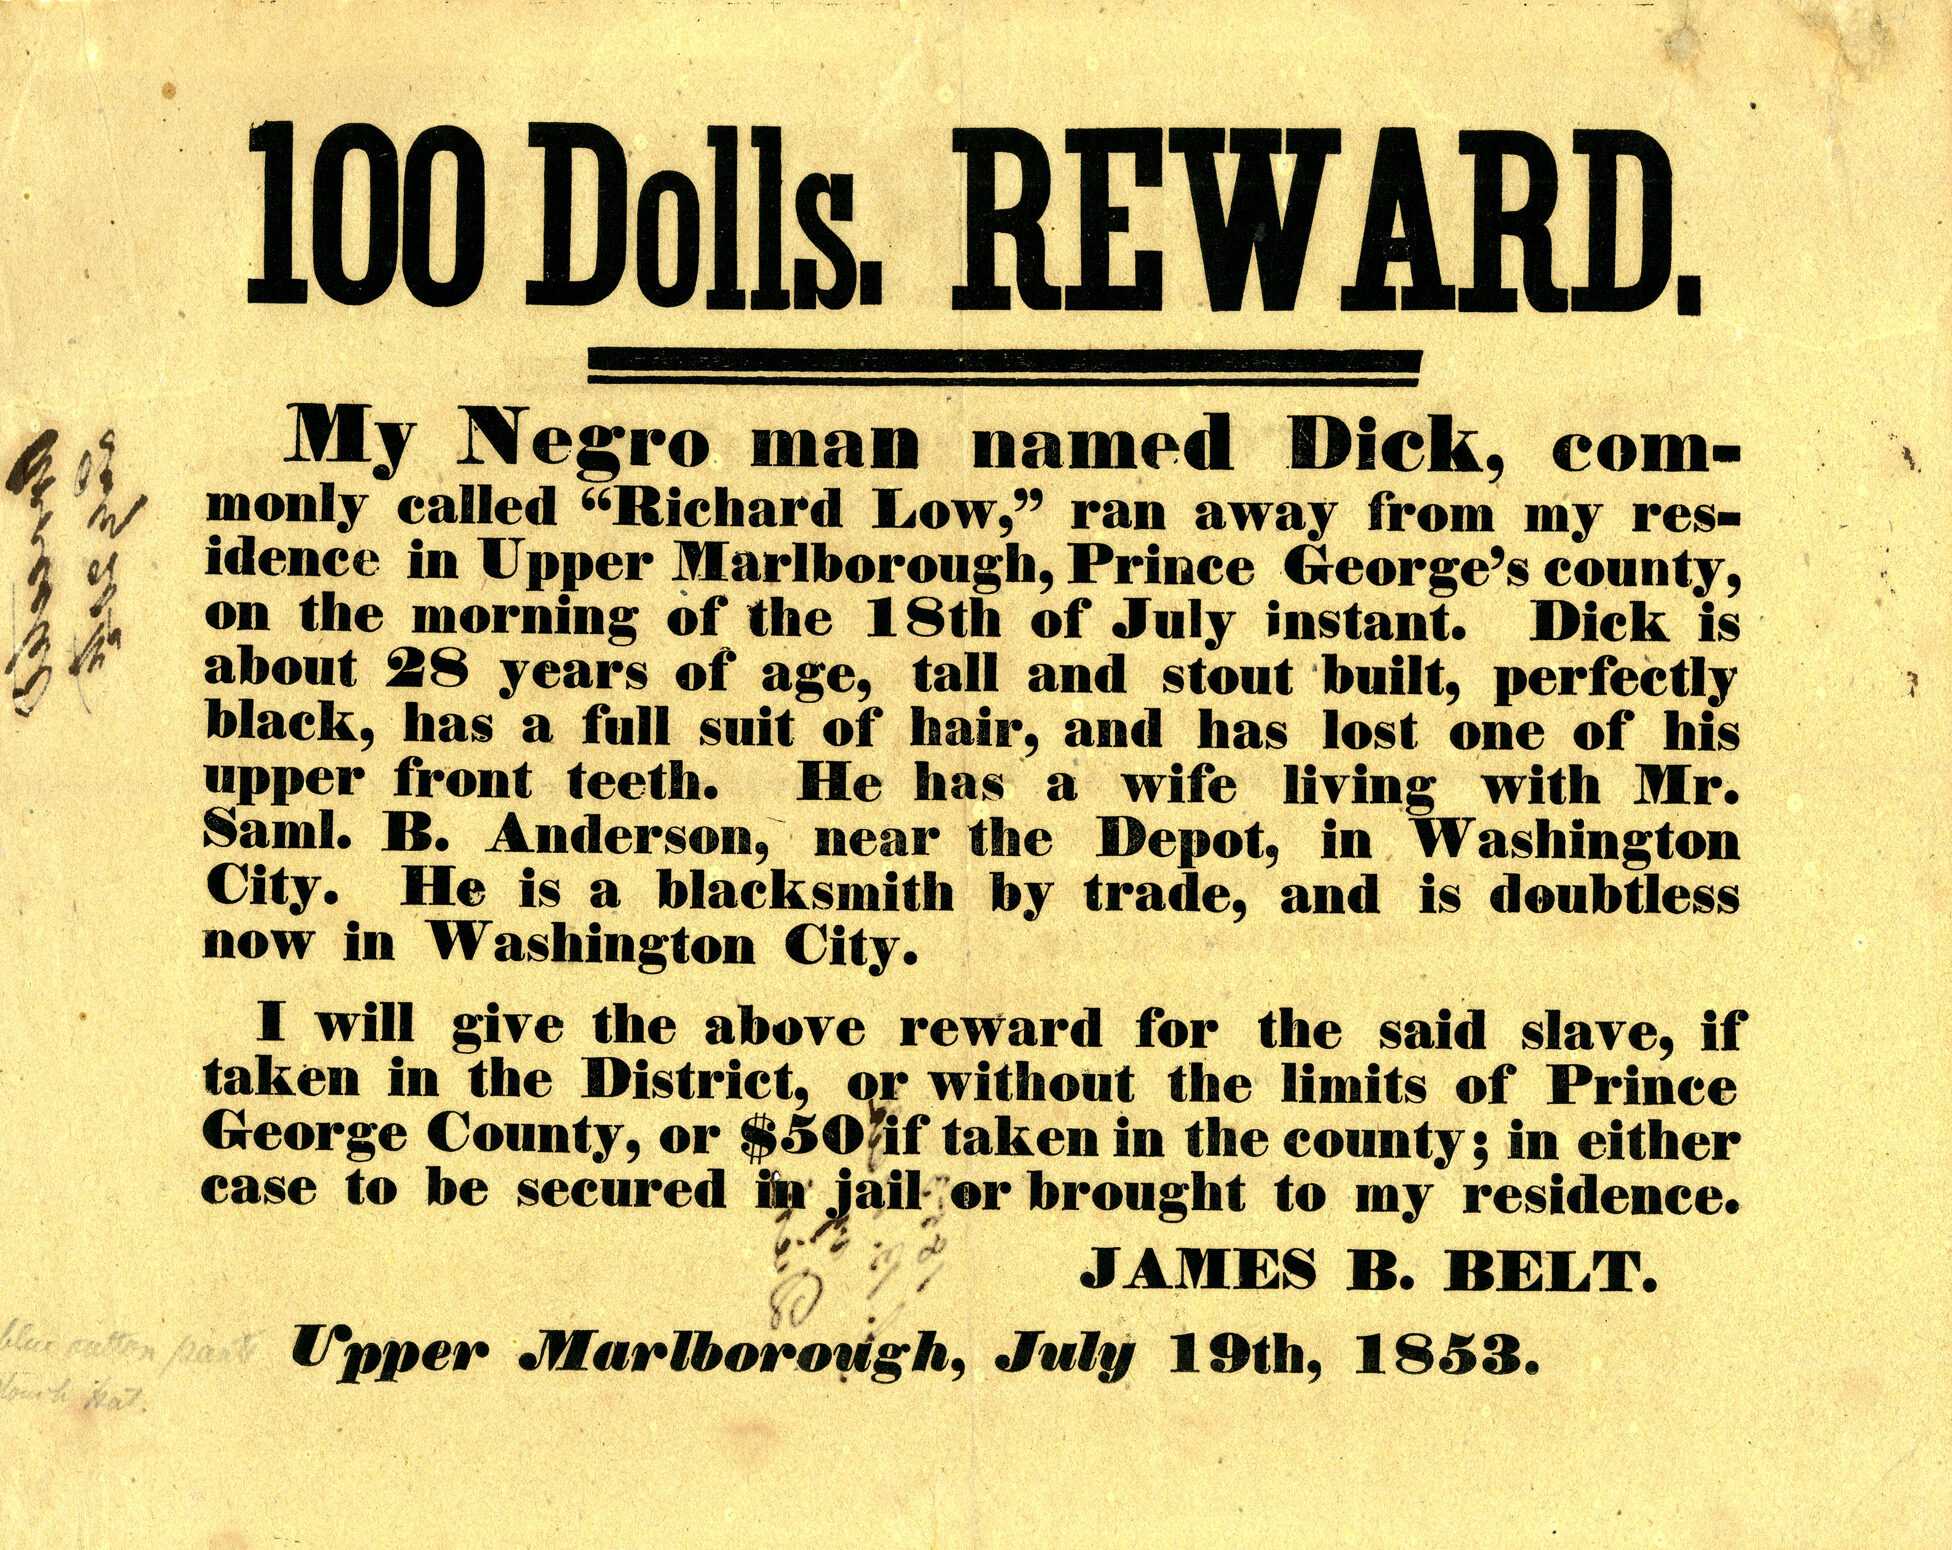 Matted and framed runaway slave broadside with reward information. Black printed text on off white paper. The top is captioned with "100 Dolls. Reward."

A matted and framed broadside advertising a reward for the return of a fugitive enslaved man, Richard Low. The broadside is printed in black text on off-white paper. In large text at the top is [100 Dolls. REWARD.] followed by smaller text reading [My Negro man named Dick, commonly called "Richard Low," ran away from my residence in Upper Marlborough, Prince George's county, on the morning of the 18th of July instant. Dick is about 28 years of age, tall and stout built, perfectly black, has a full suit of har, and has lost one of his upper front teeth. He has a wife living with Mr. Saml. B. Anderson, nar the Depot, in Washington City. He is a blacksmith by trade, and is doubtless now in Washington City.]. At bottom right is the name of the poster: [JAMES B. BELT.] and at bottom center is [Upper Marlborough, July 19th 1853.].